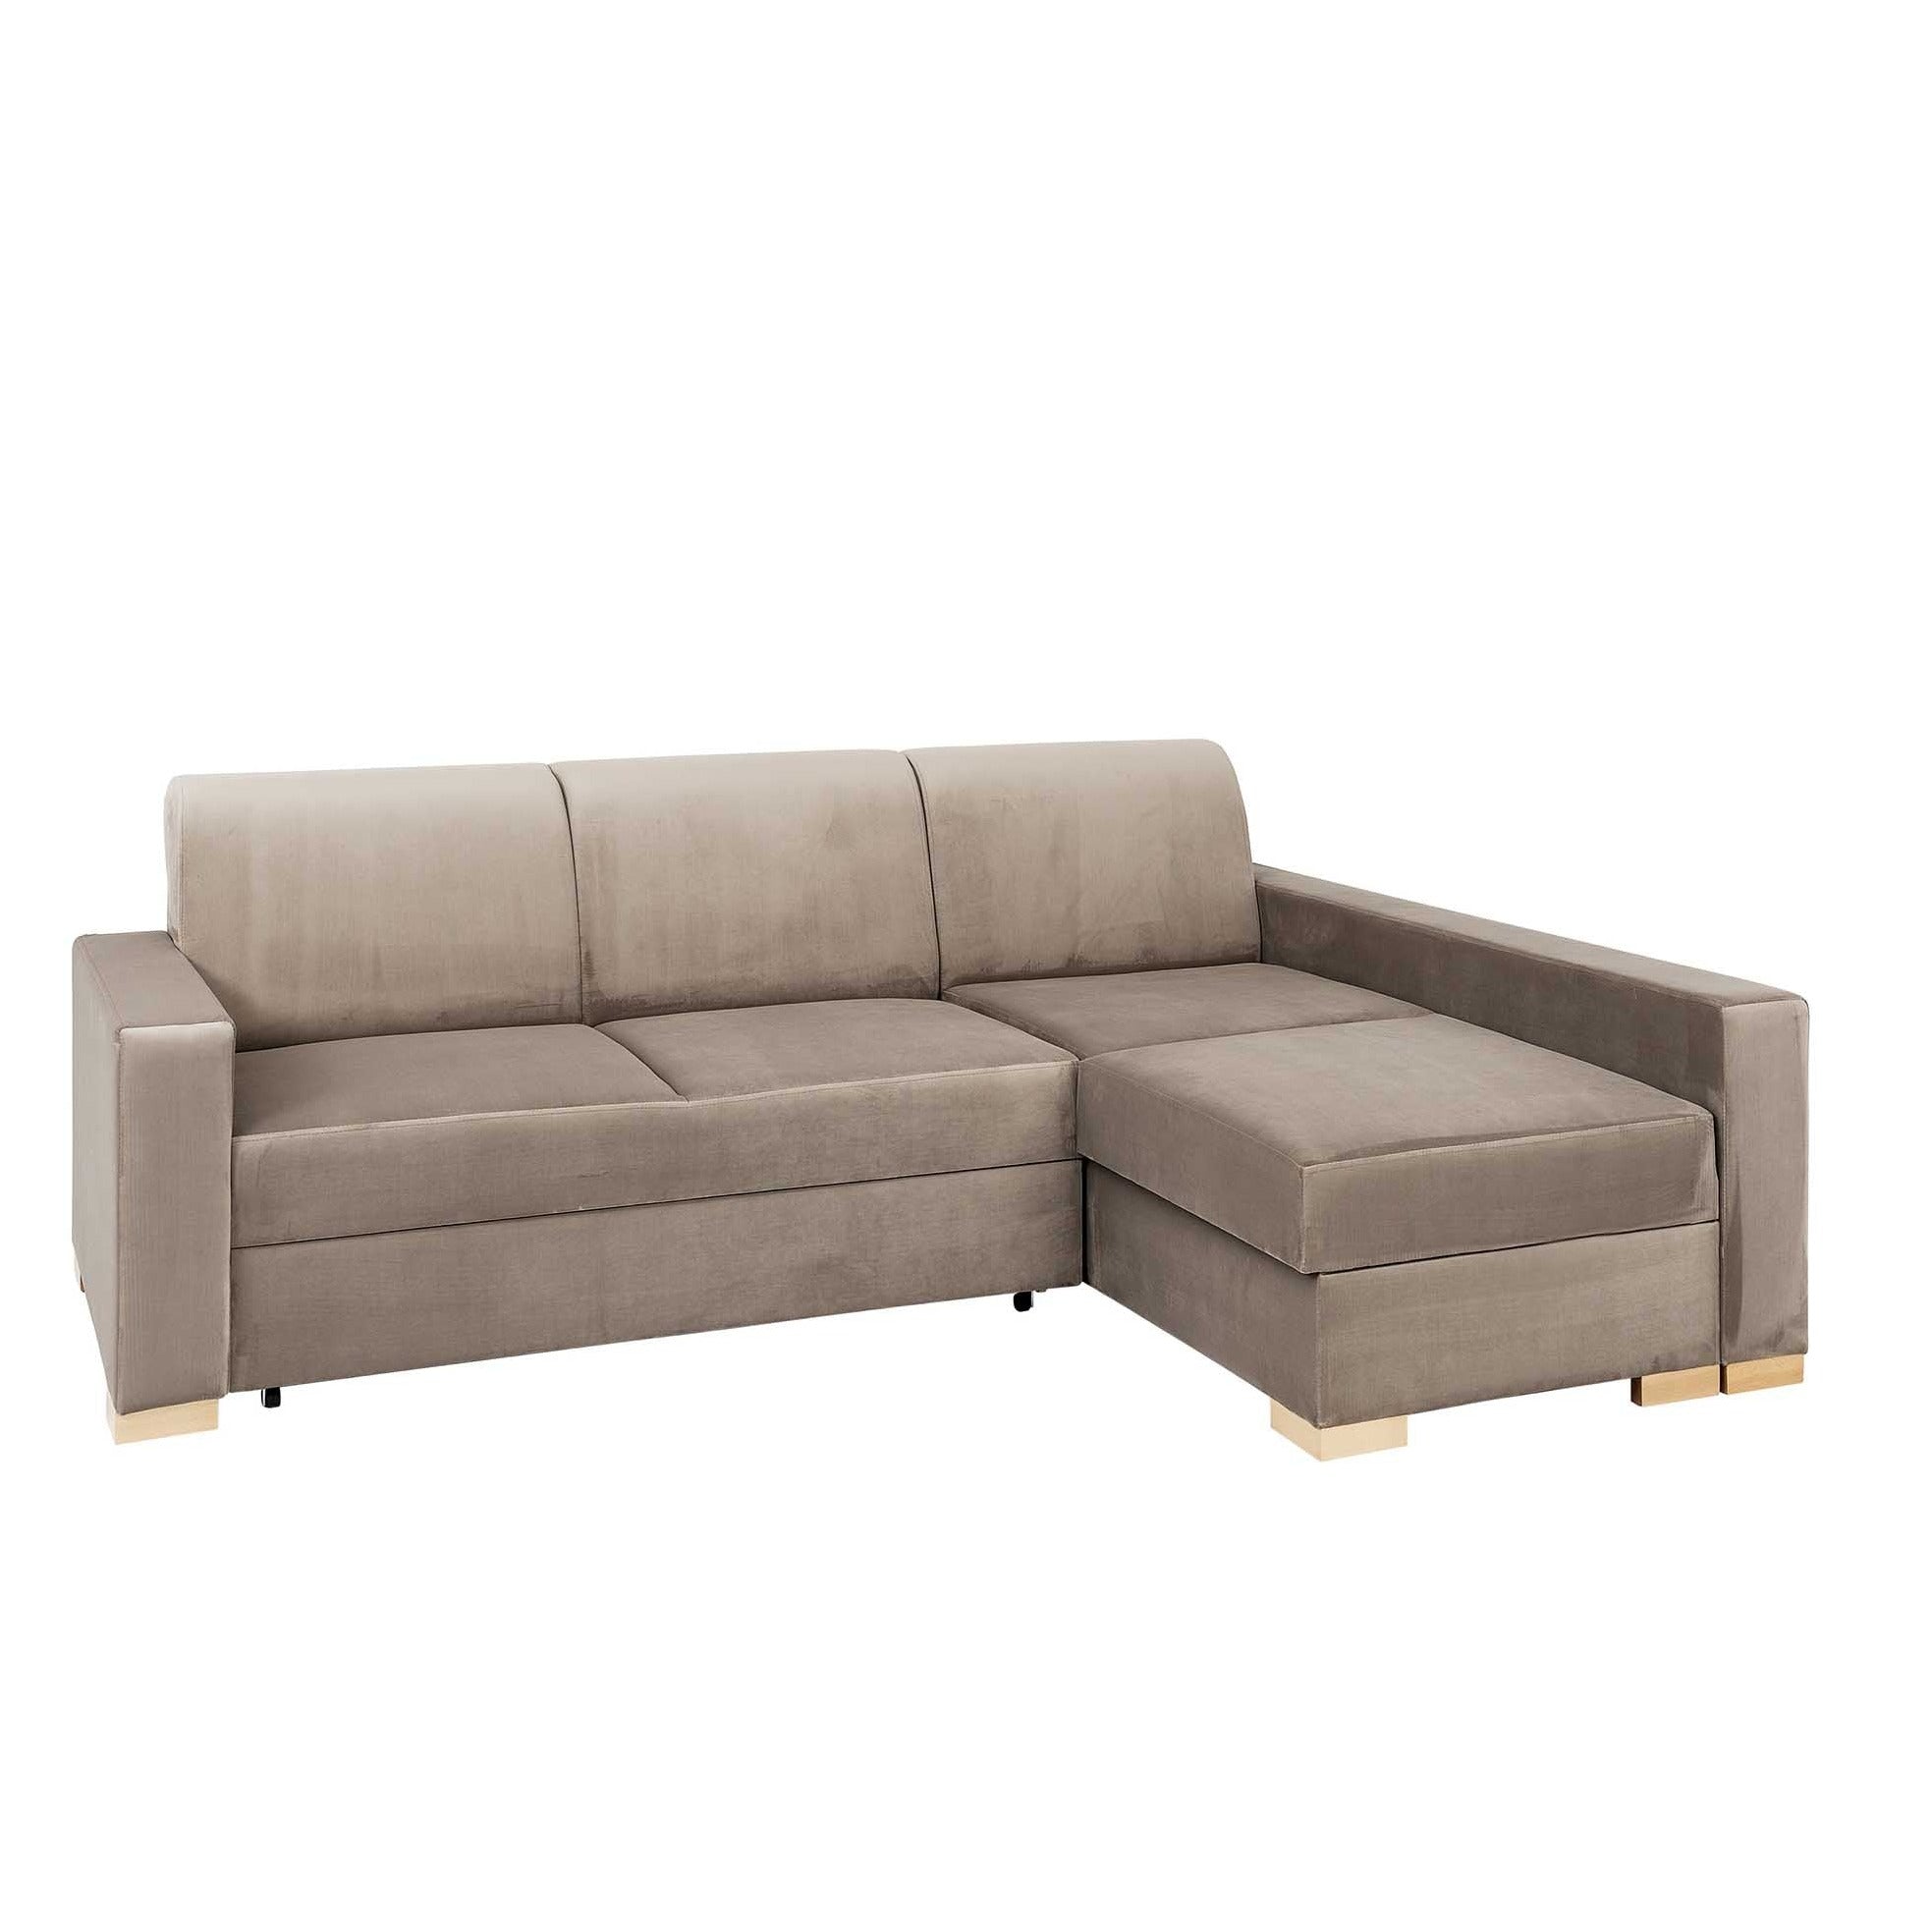 STABLE Corner Sofa Right upholstery colour beige